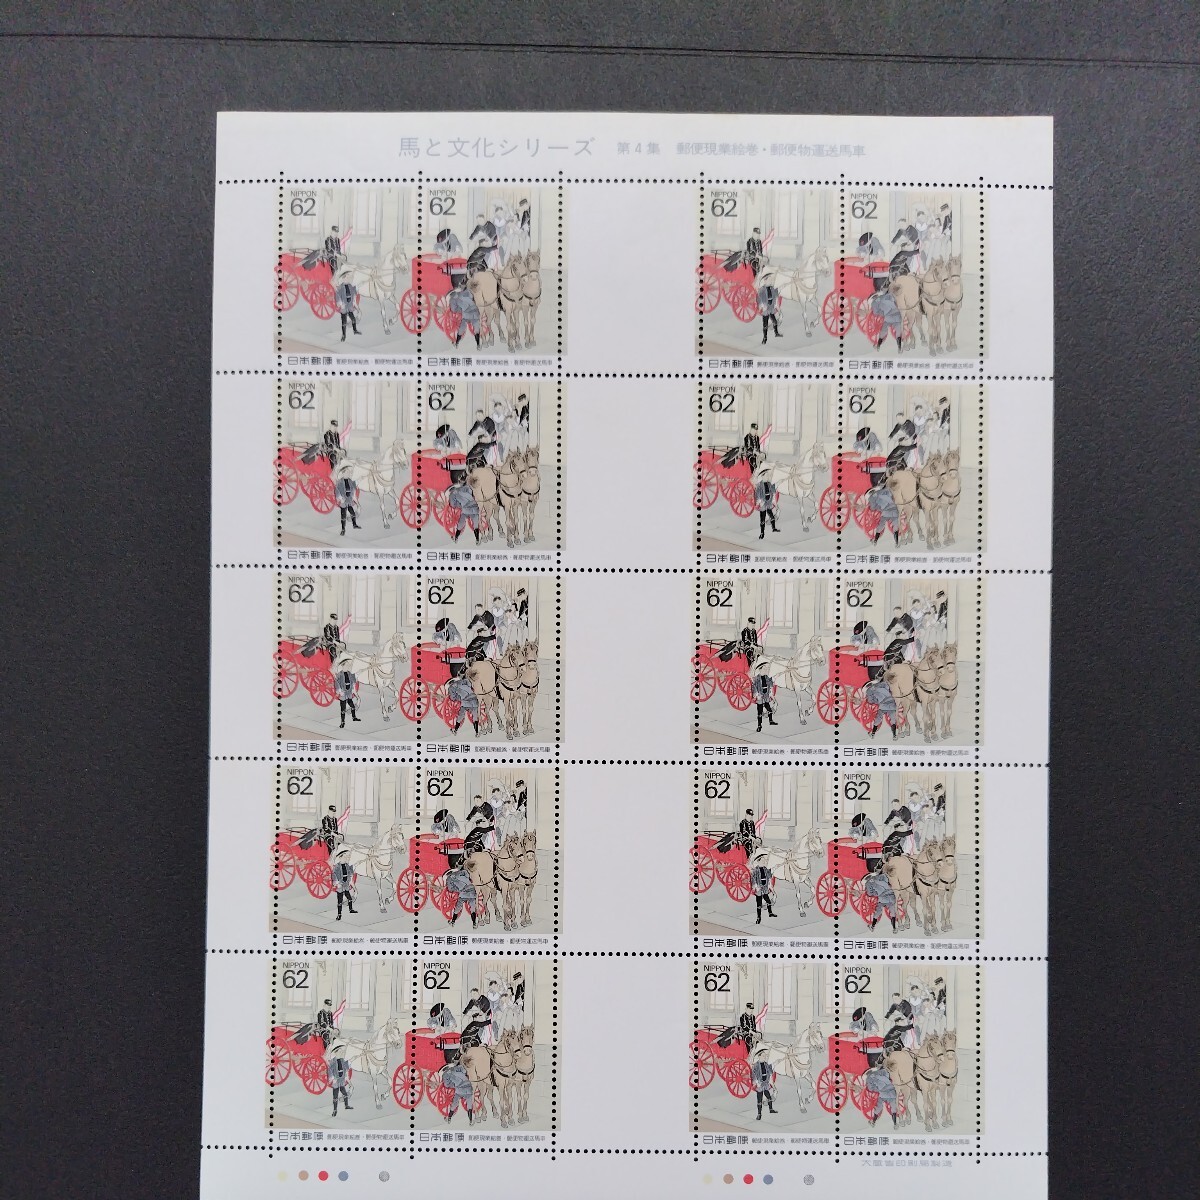  Heisei era 3 year issue special stamp,[ Uma to Bunka series no. 4 compilation mail reality industry . volume * mail thing transportation horse car .,62 jpy stamp 20 sheets,1 seat, face value 1,240 jpy.